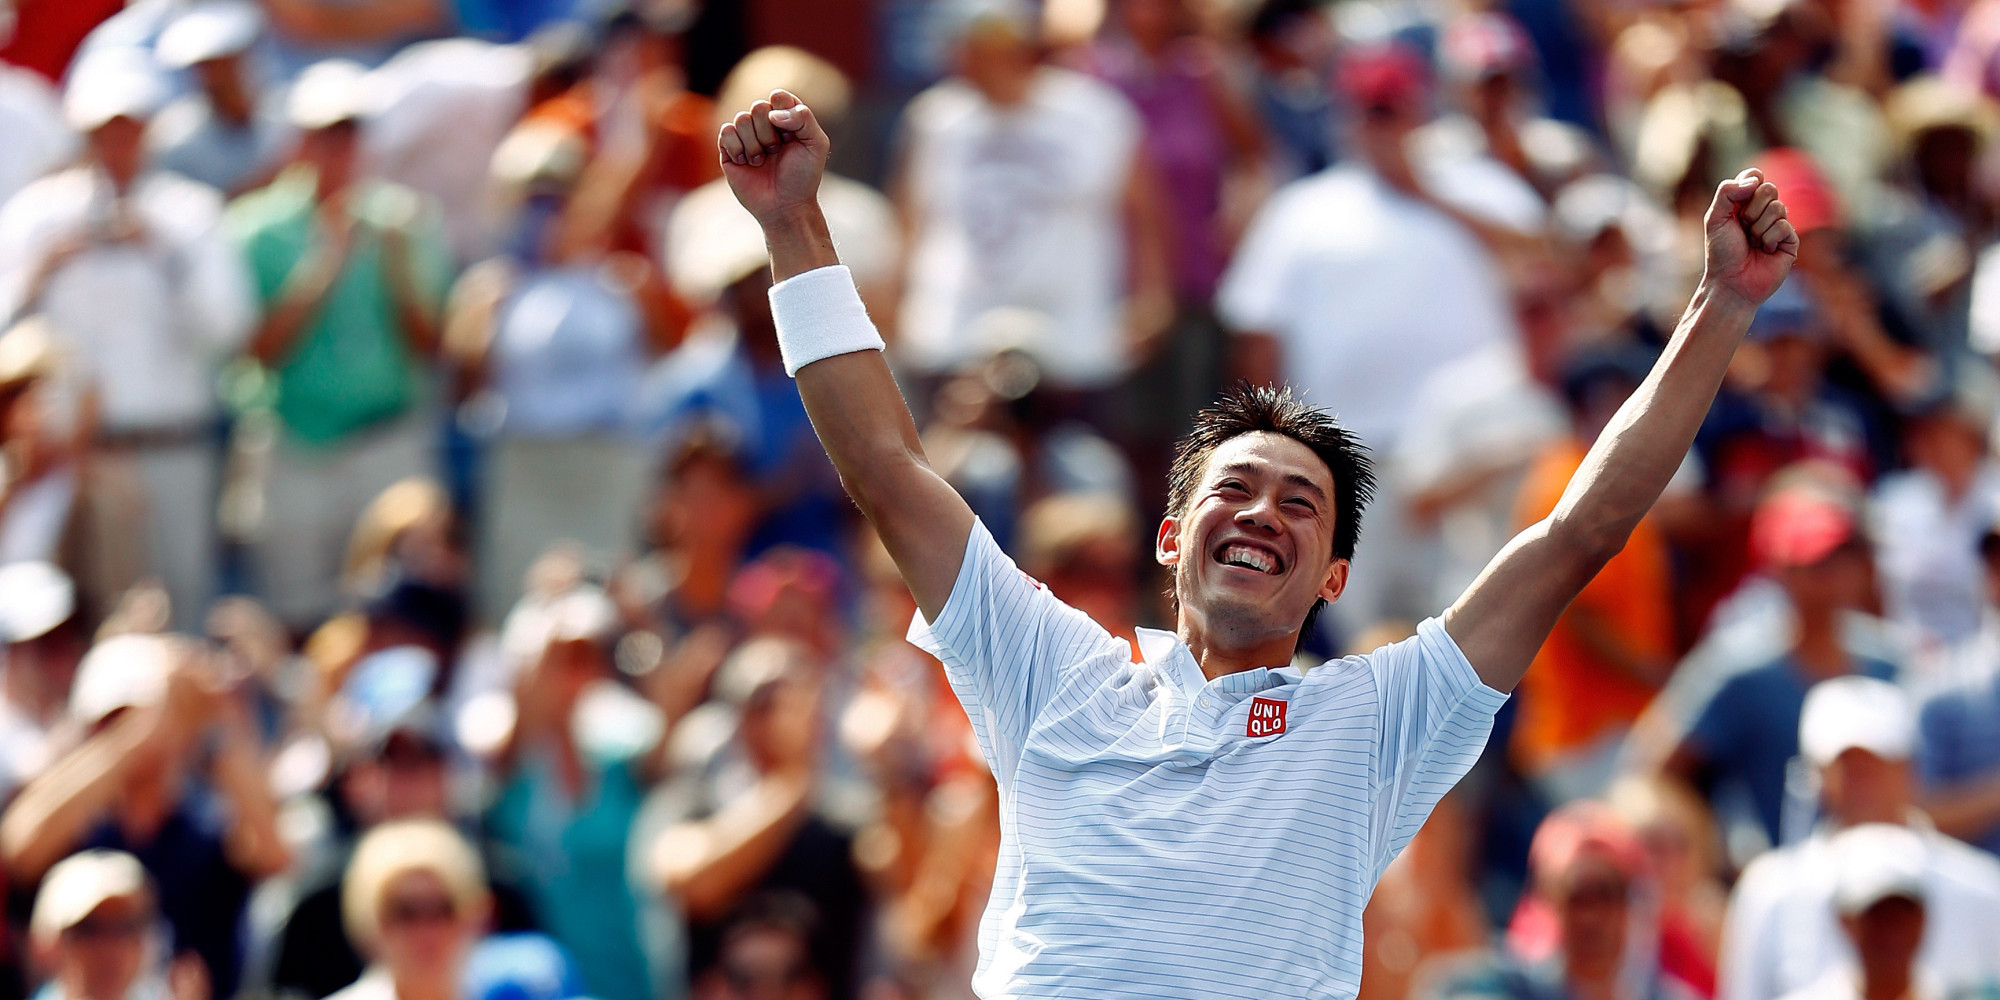 NEW YORK, NY - SEPTEMBER 06:  Kei Nishikori of Japan celebrates after defeating Novak Djokovic of Serbia in their men's singles semifinal match on Day Thirteen of the 2014 US Open at the USTA Billie Jean King National Tennis Center on September 6, 2014 in the Flushing neighborhood of the Queens borough of New York City.  Nishikori defeated Djokovic in four sets 6-4, 1-6, 7-6, 6-3.  (Photo by Julian Finney/Getty Images)